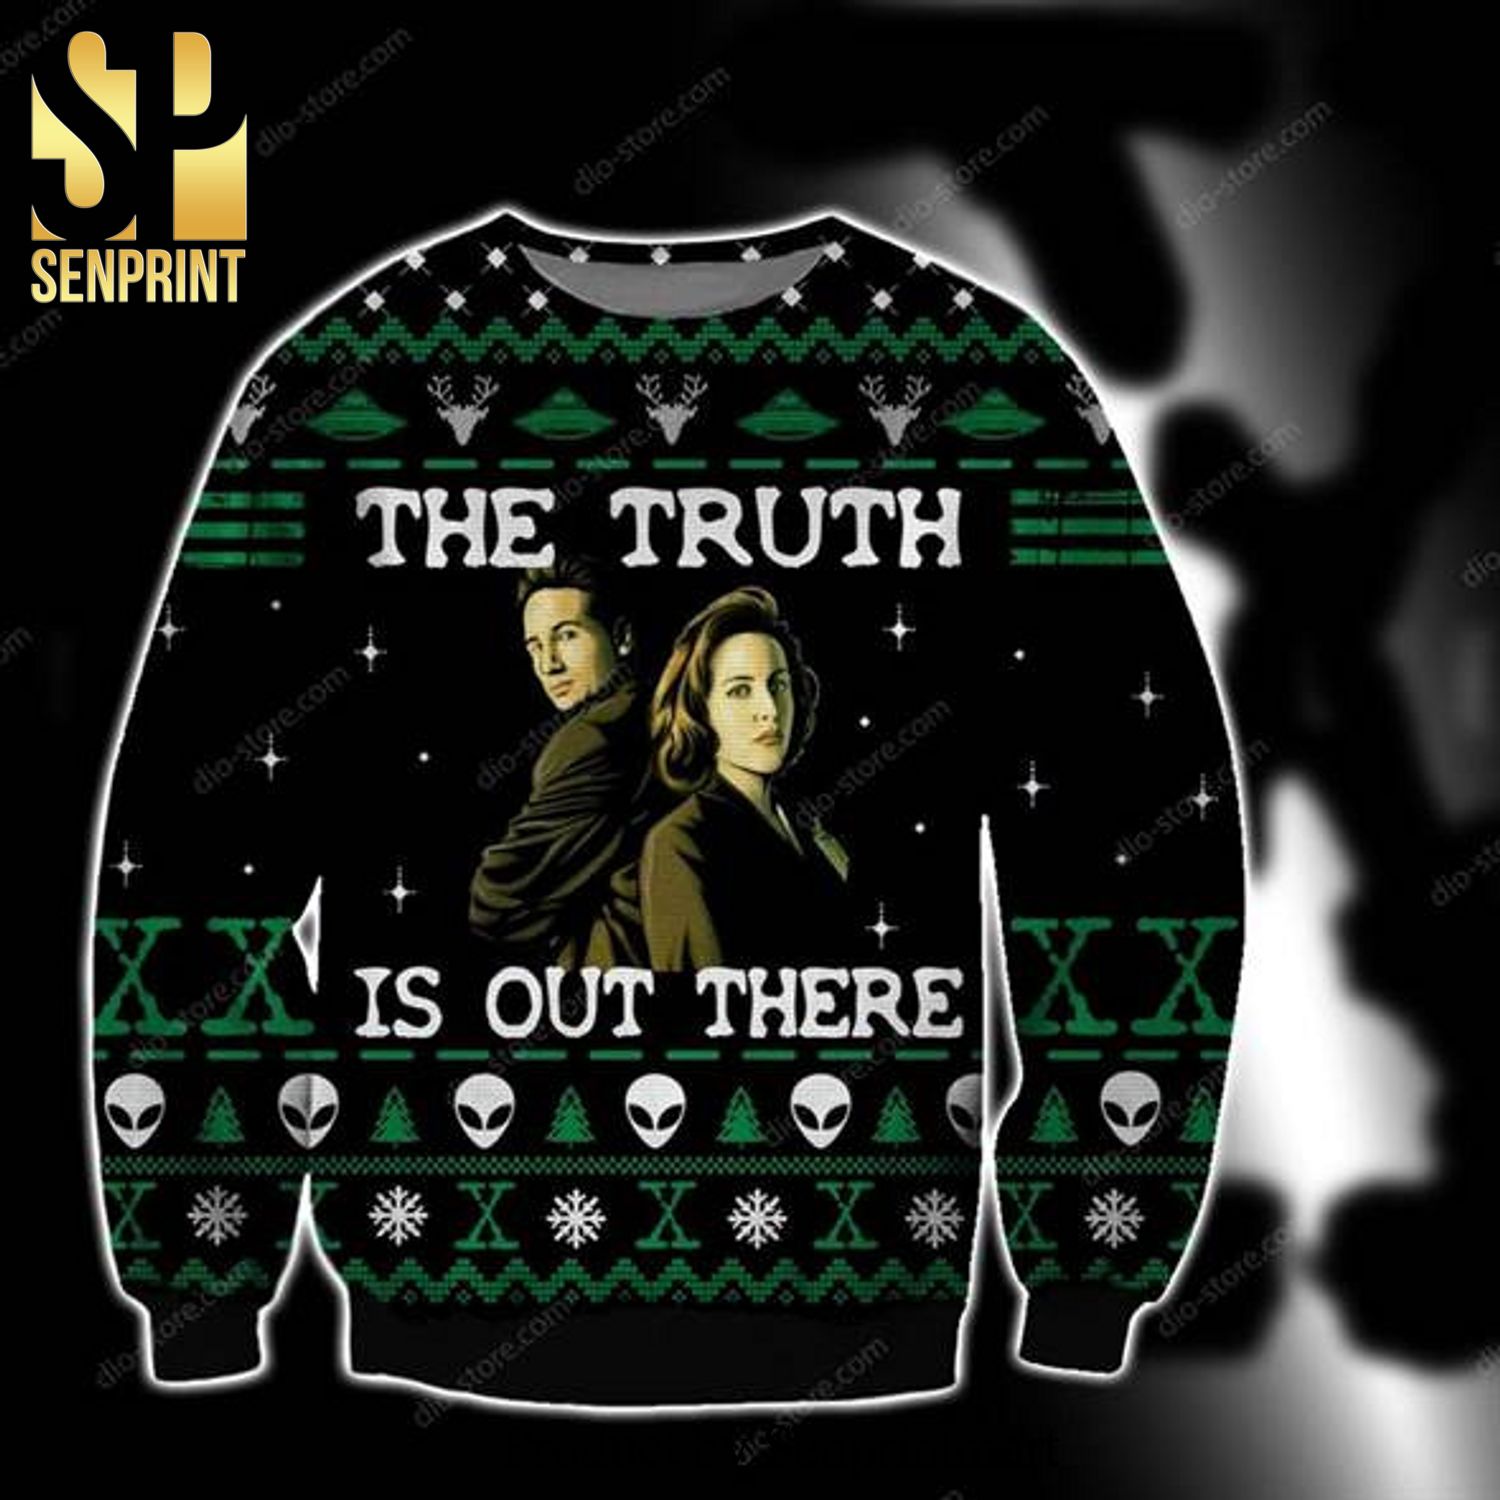 Fox Mulder Dana Scully The X- Files The Truth Is Out There Knitted Ugly Christmas Sweater